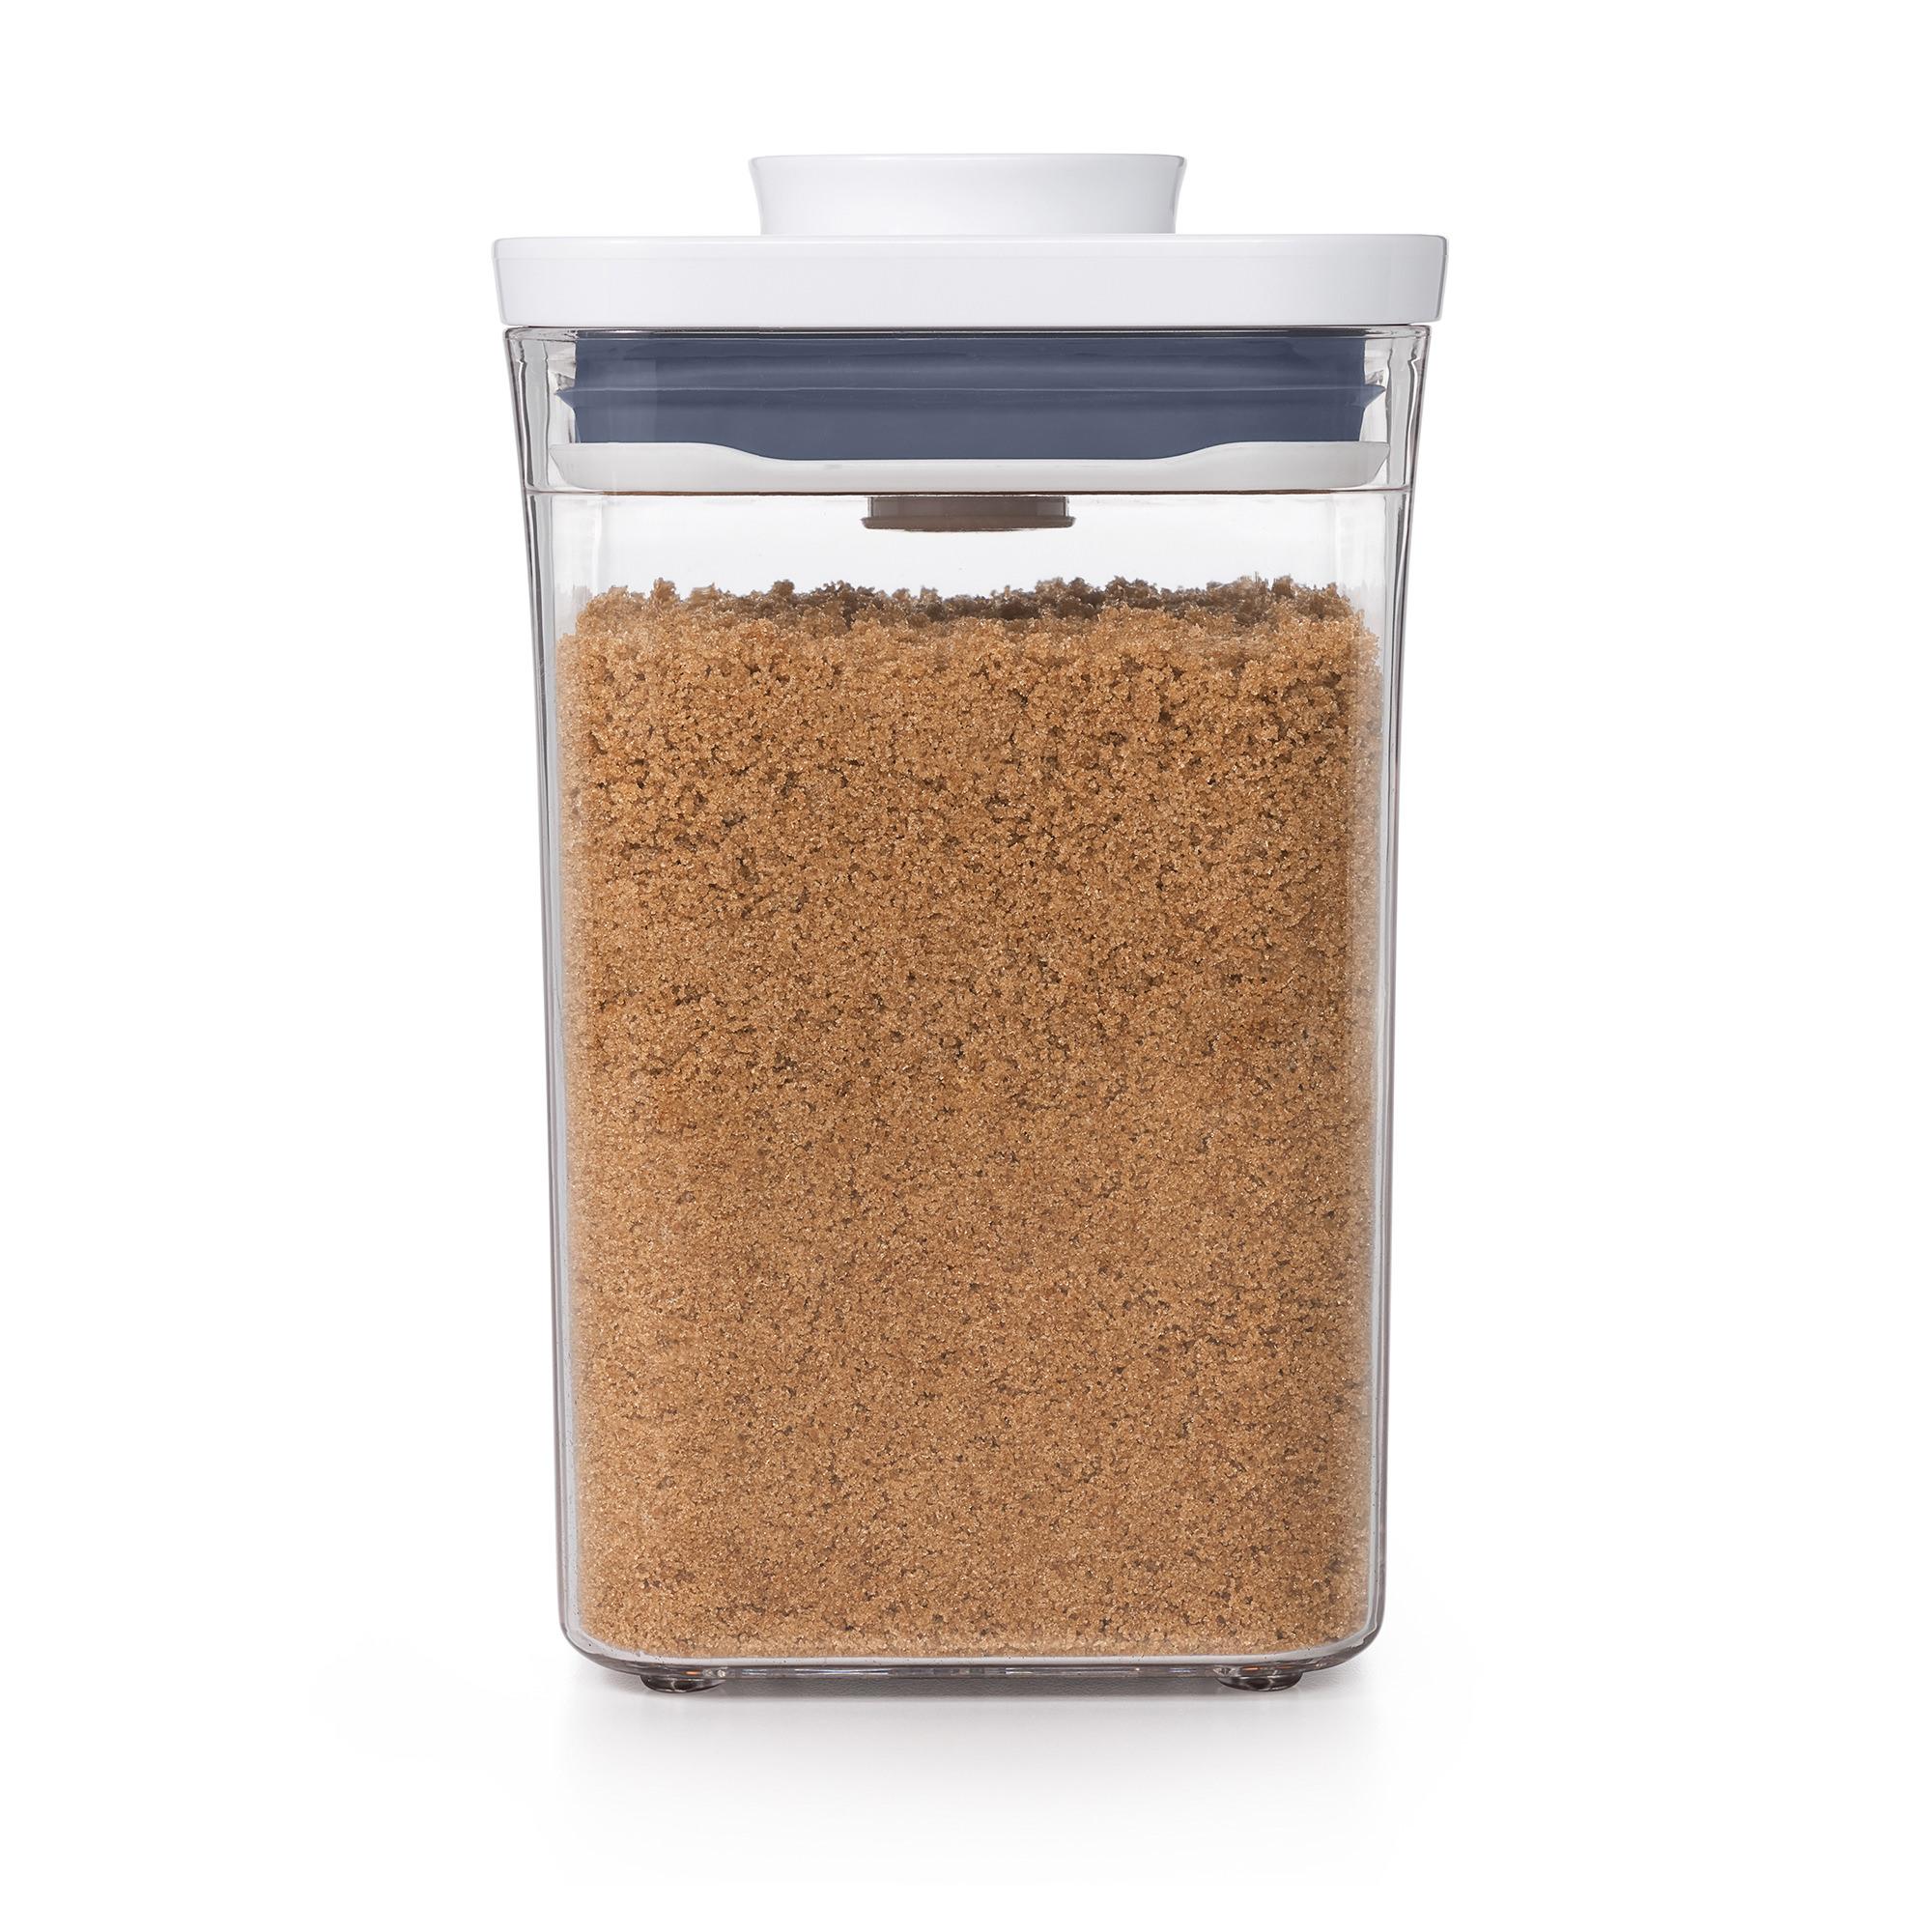 OXO Good Grips Square Pop 2.0 Container 1L Image 5